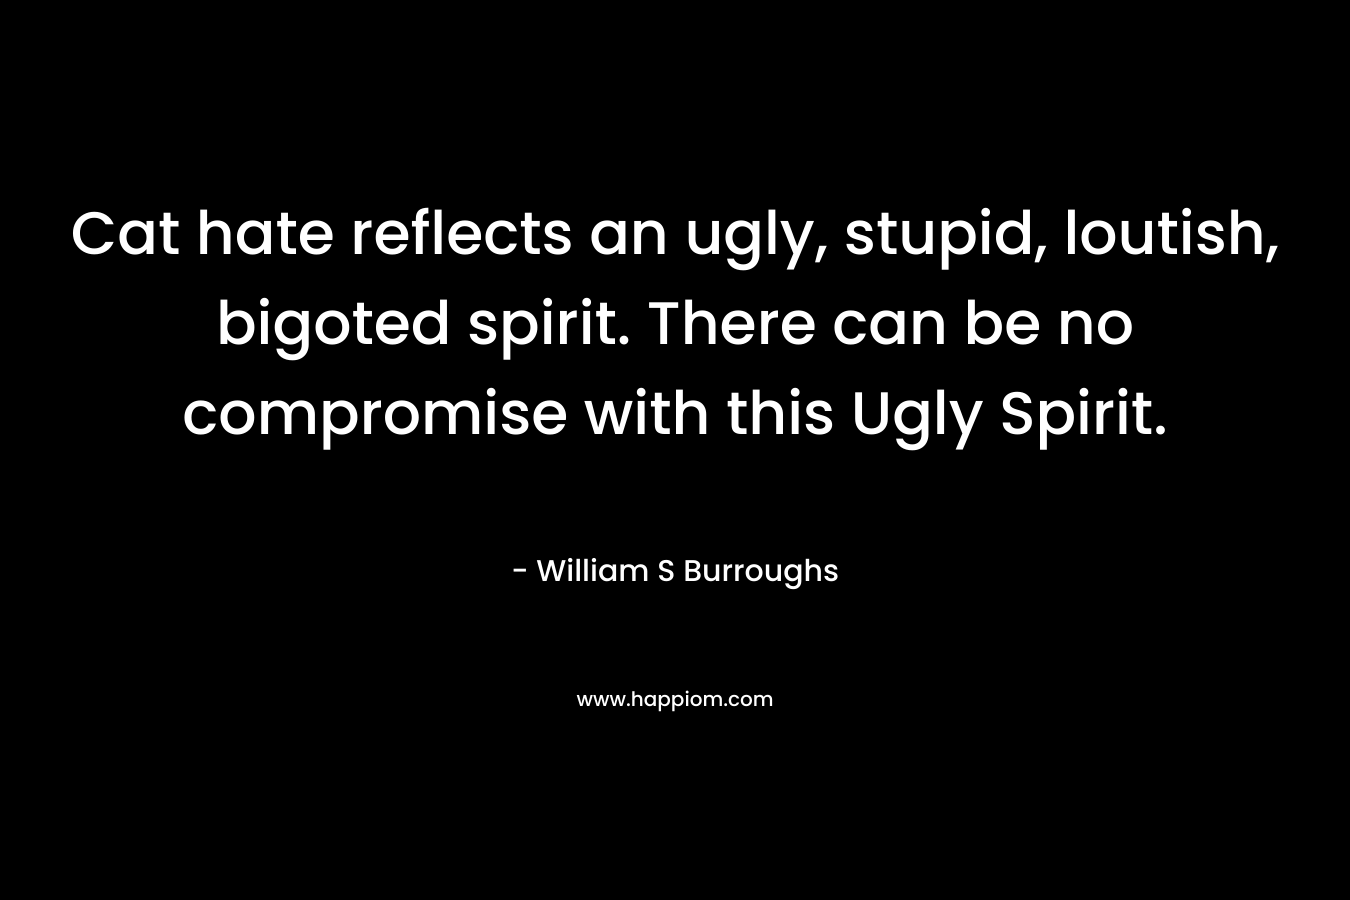 Cat hate reflects an ugly, stupid, loutish, bigoted spirit. There can be no compromise with this Ugly Spirit. – William S Burroughs